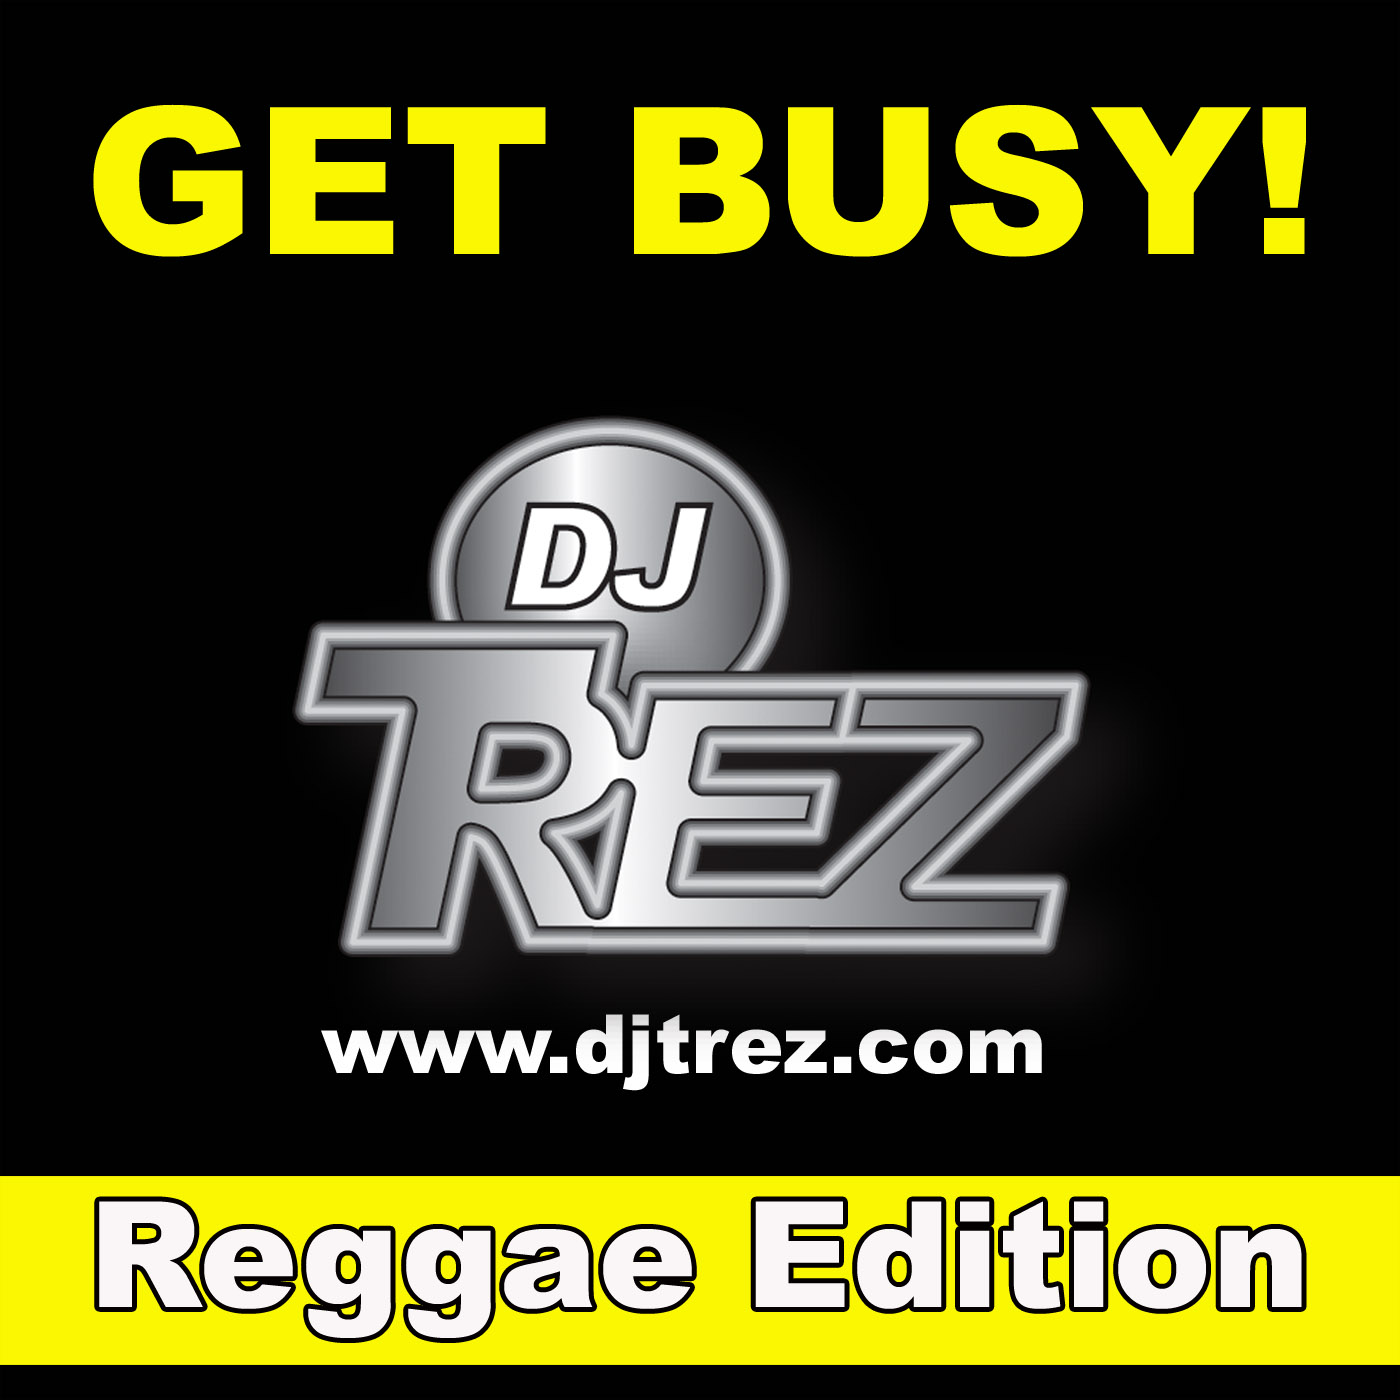 The Get Busy Party Podcast-Reggae Edition